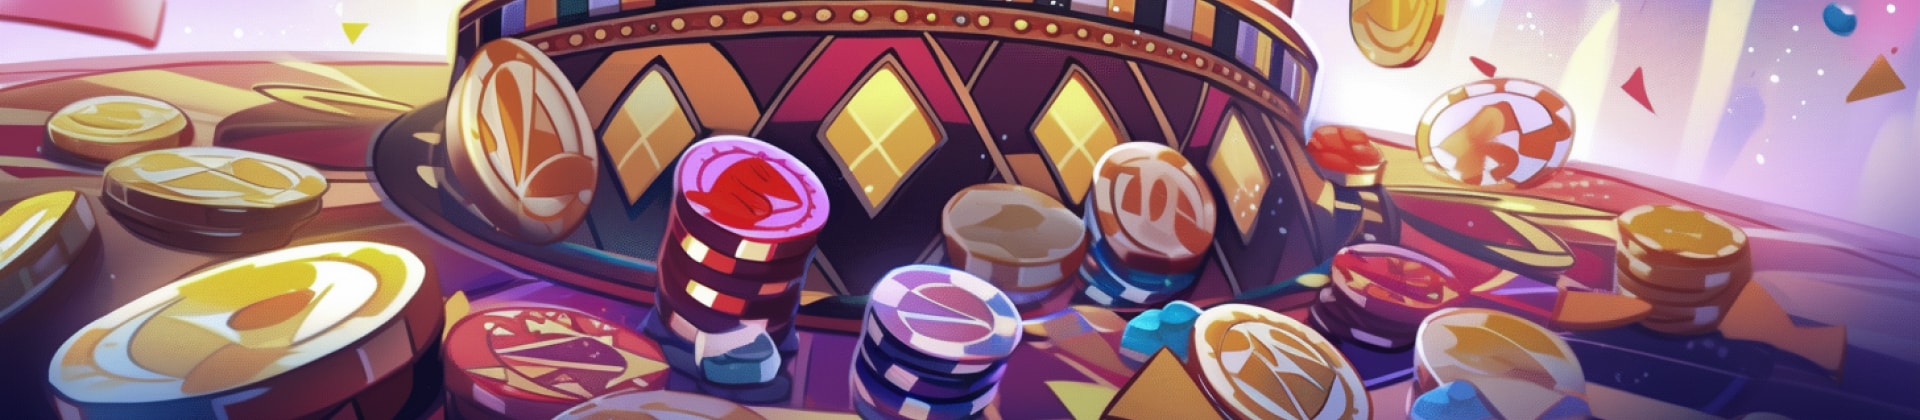 Vip and high-rollers casino bonuses